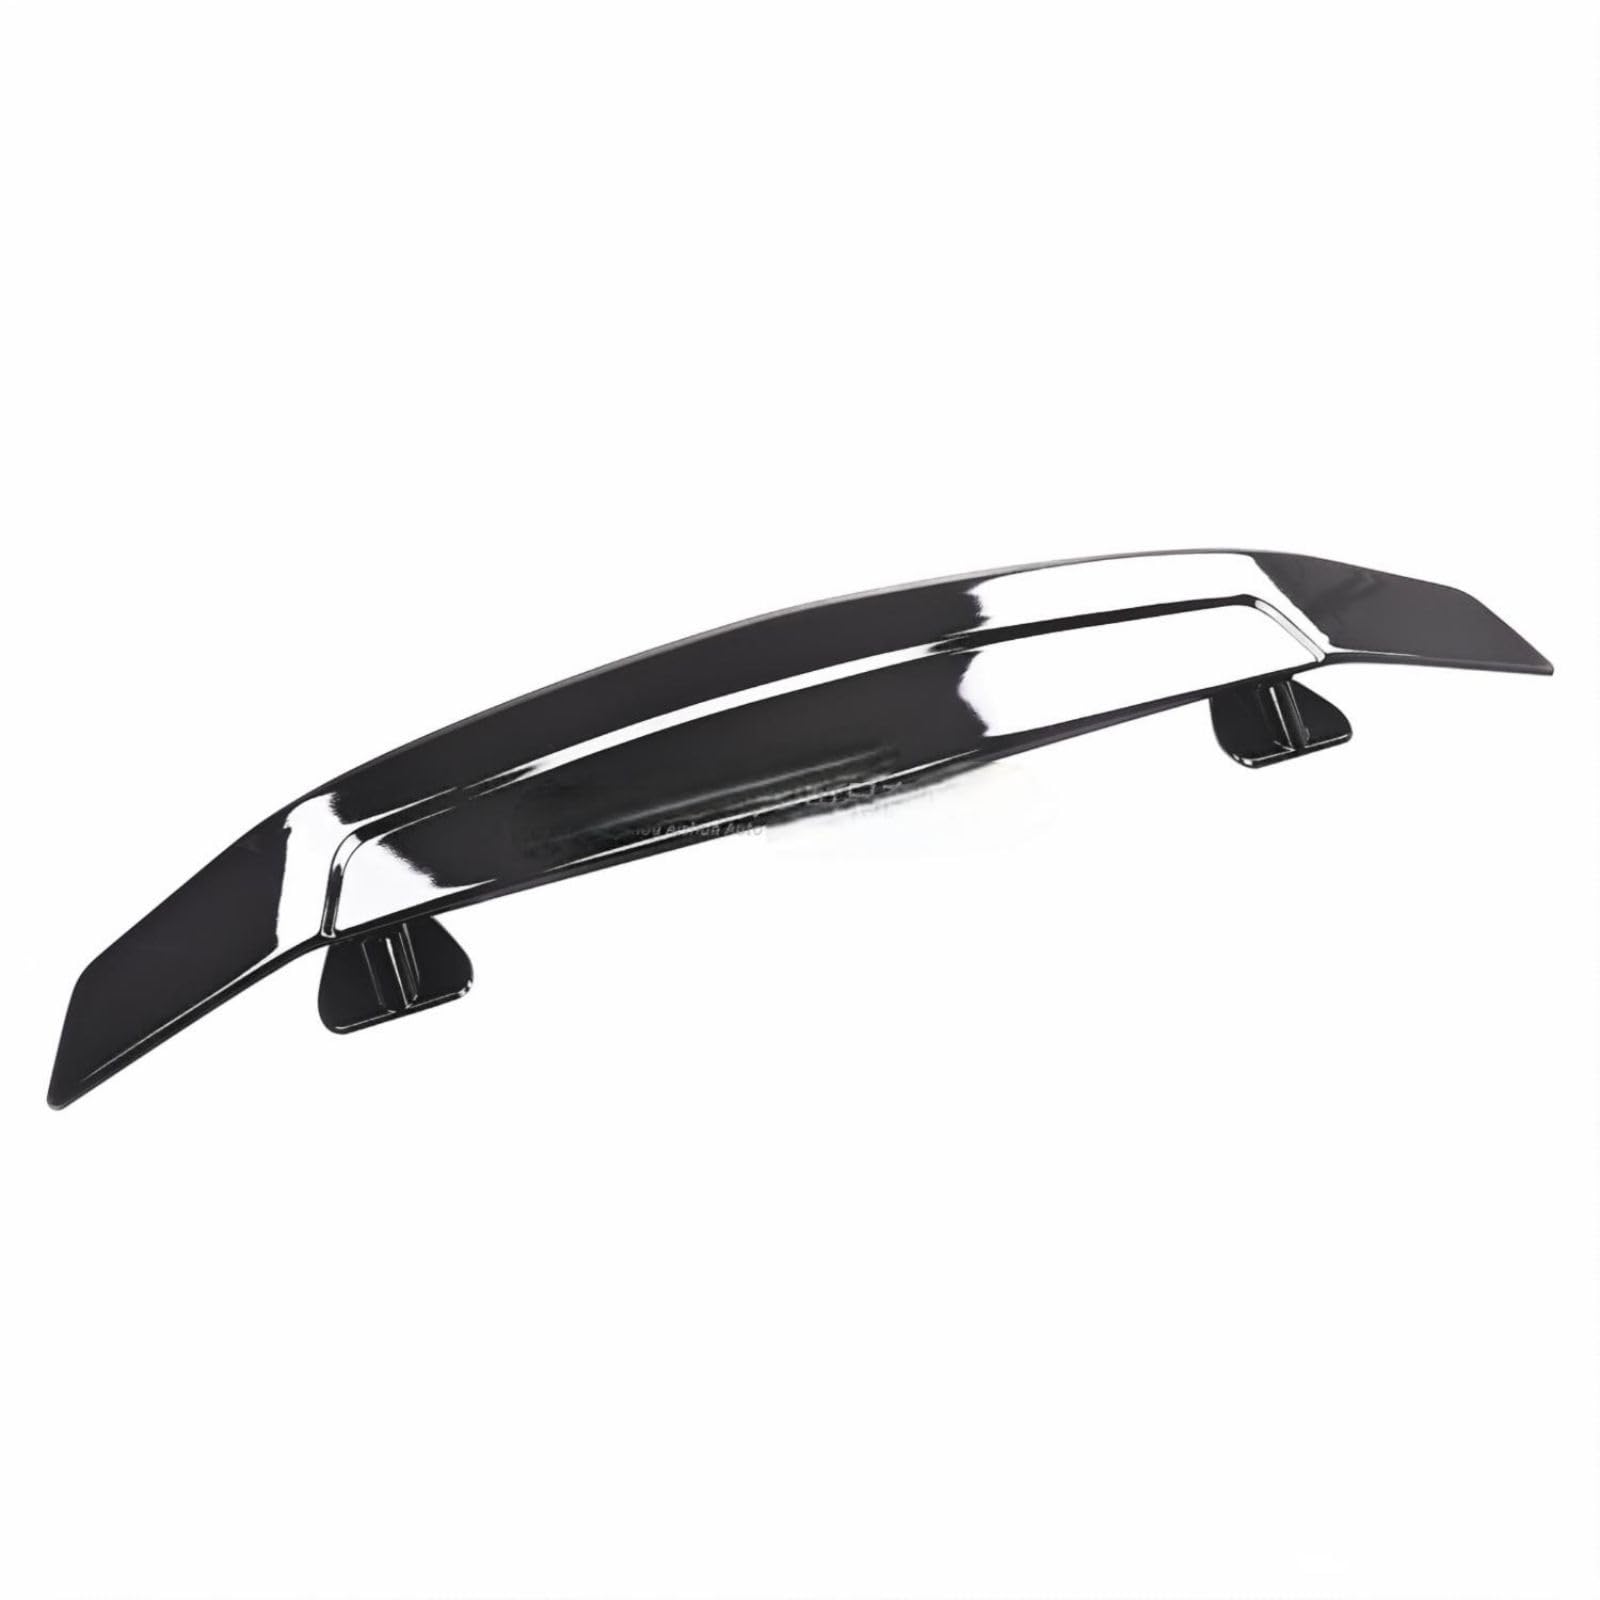 Car Rear Window Spoiler for BMW M6 Coupe (F13M) 2012-2014, without Perforation Lid Spoiler Wings Installation Rear Wing Decoration,Bright Black von EESWCSZZ3